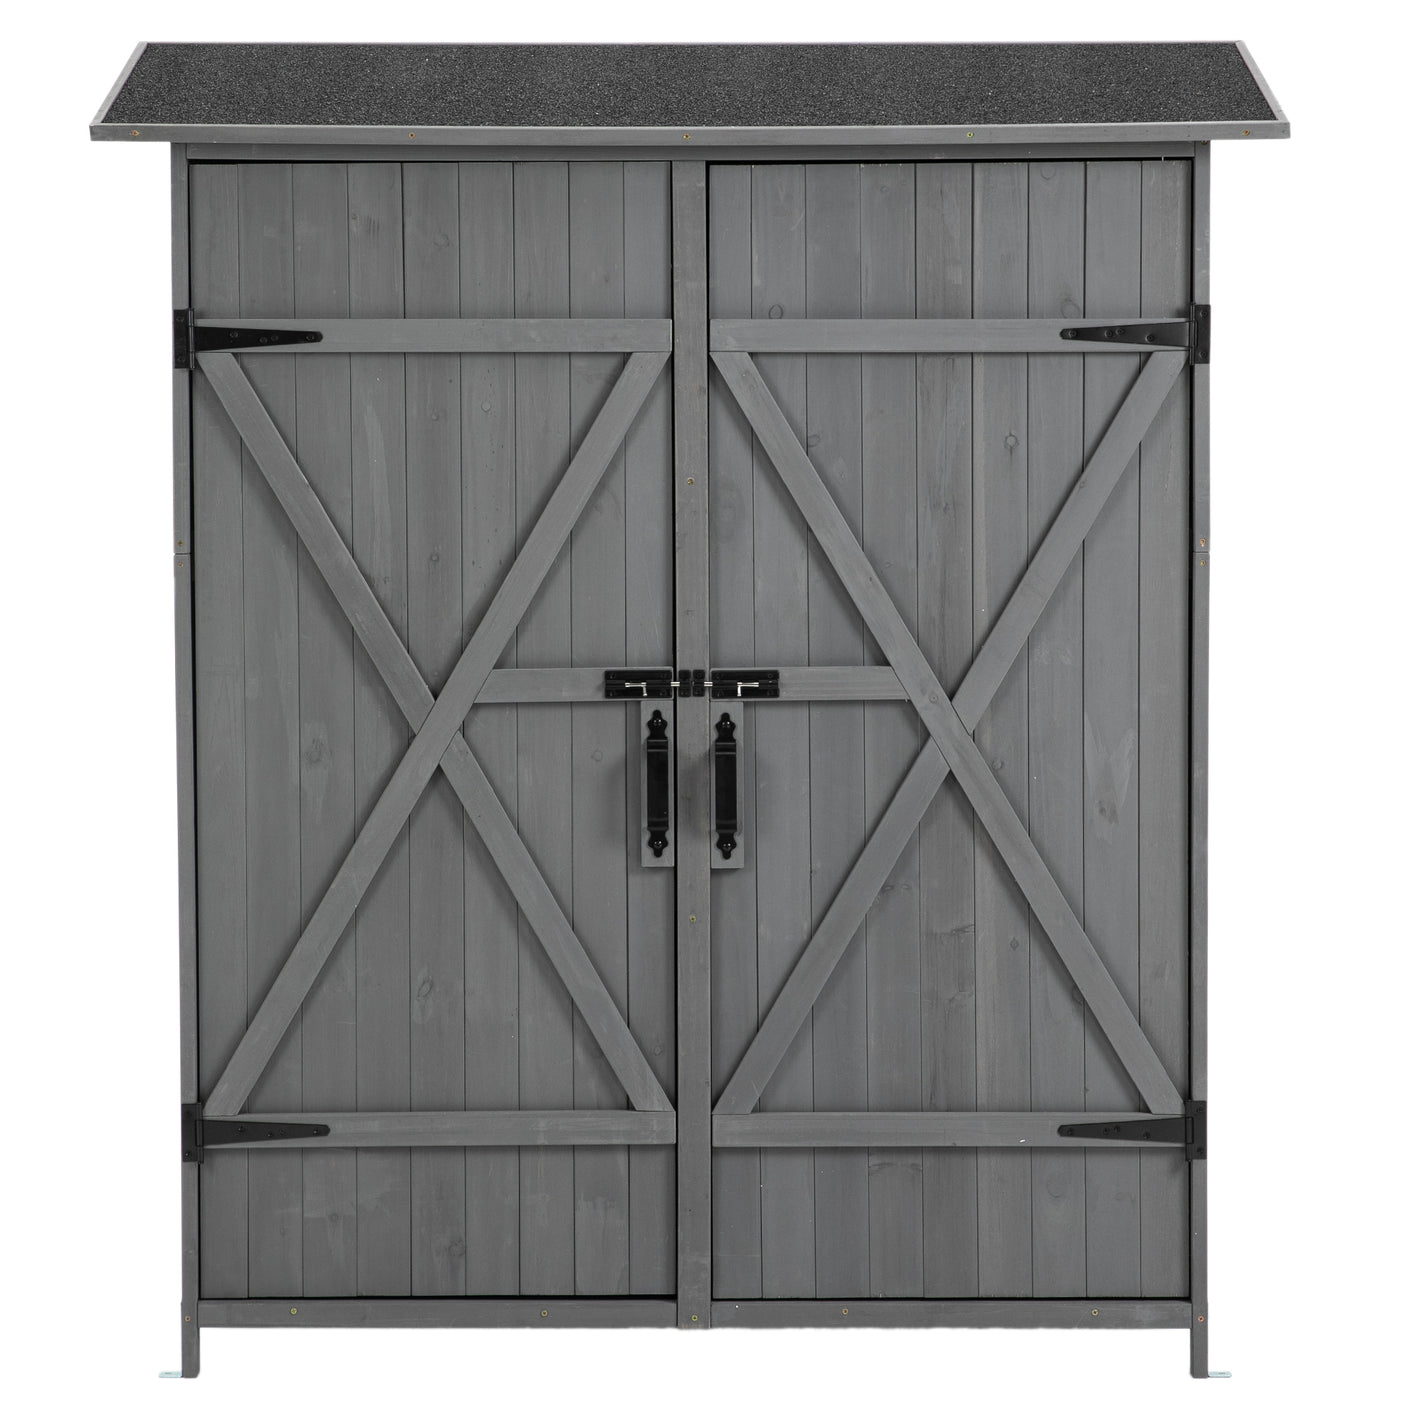 56”L x 19.5”W x 64”H Outdoor Storage Shed with Lockable Door, Wooden Tool Storage Shed w/Detachable Shelves & Pitch Roof,Gray